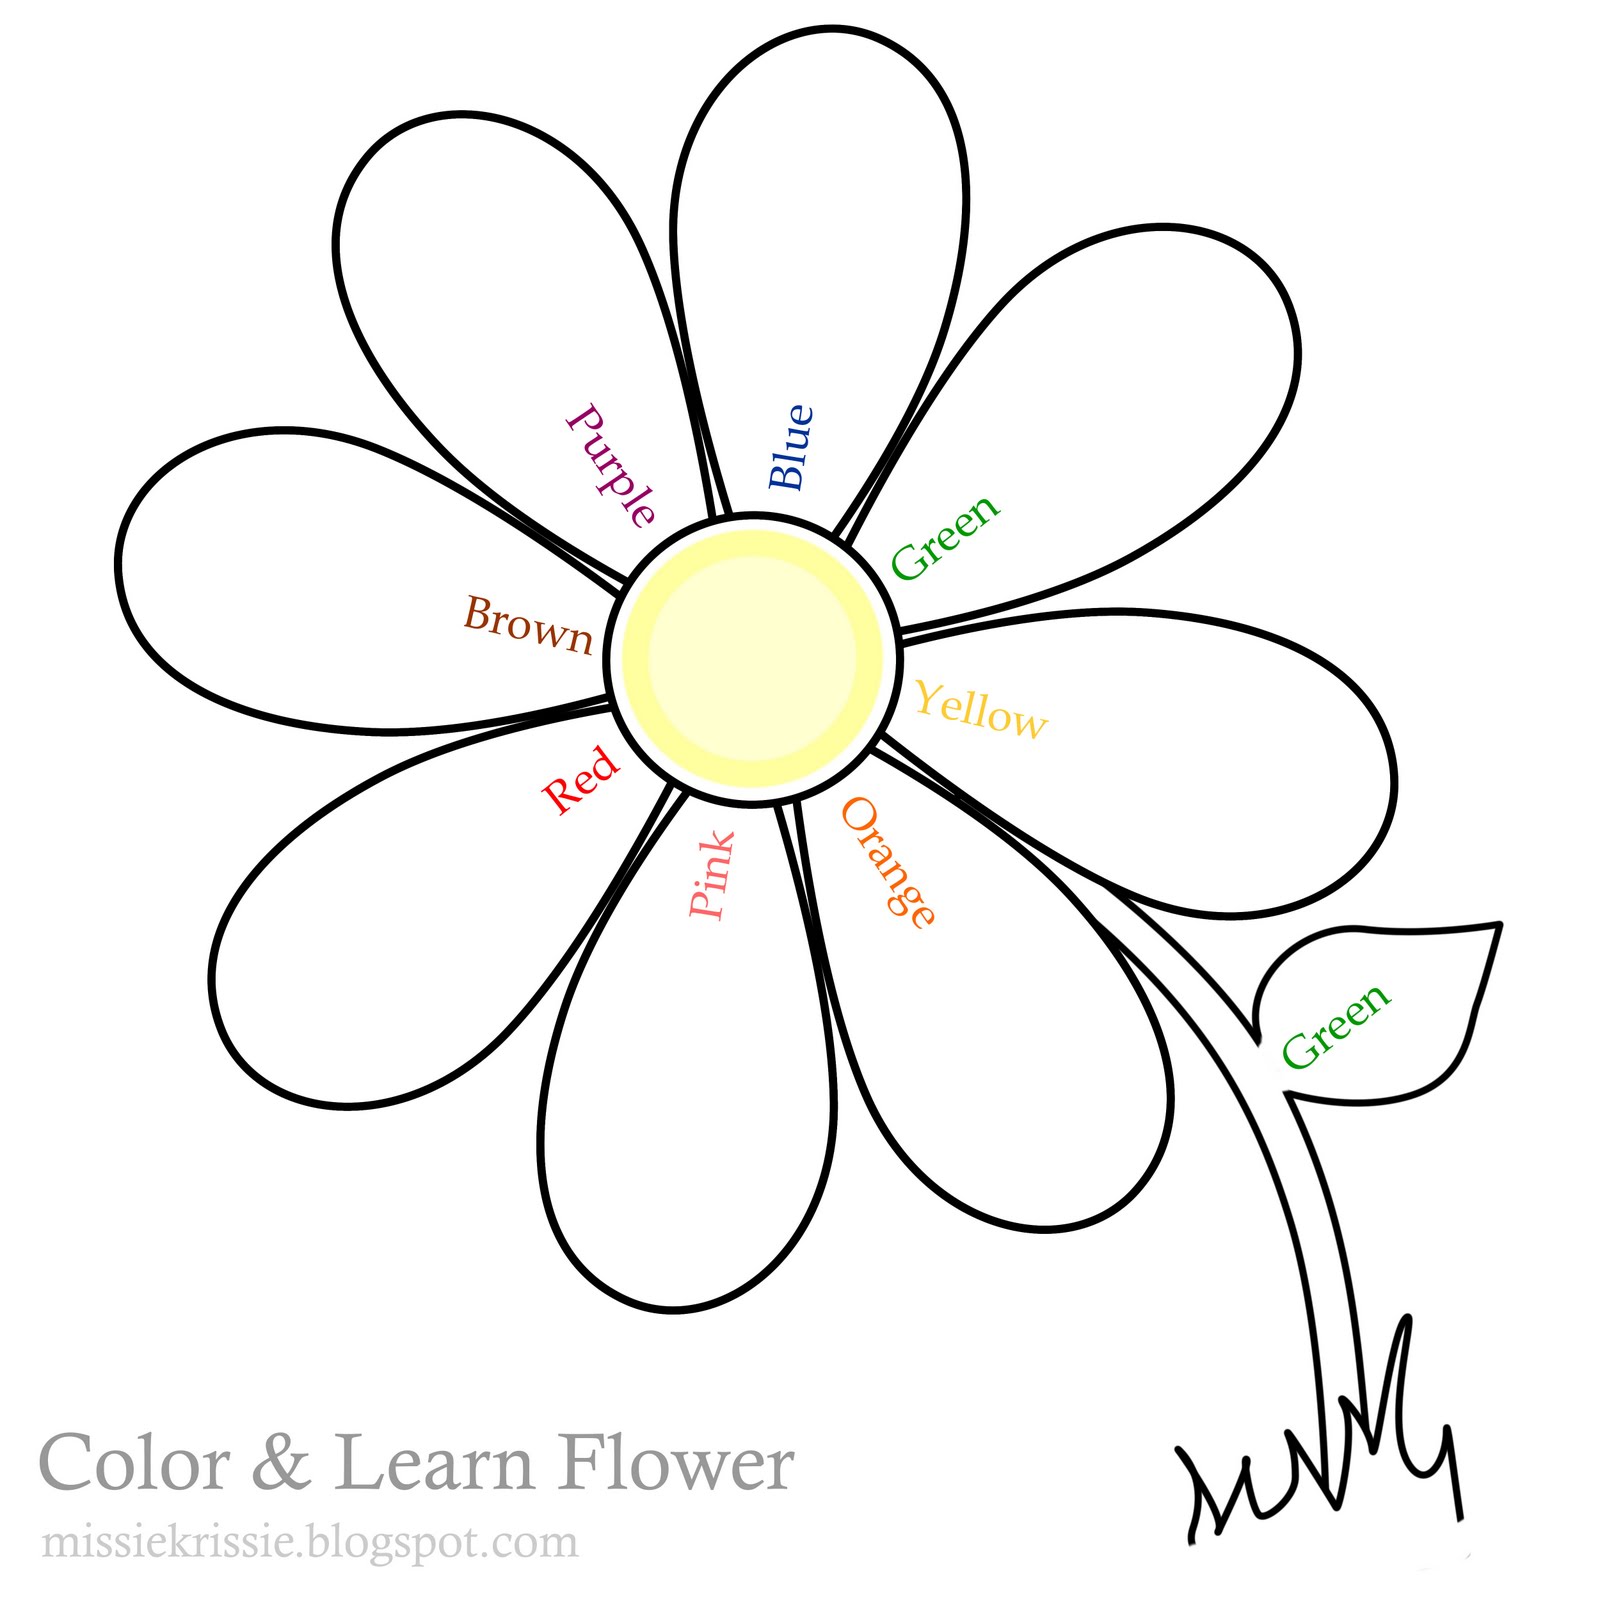 Missie Krissie: Tuesday Freebies! Colour and Learn flower for kids